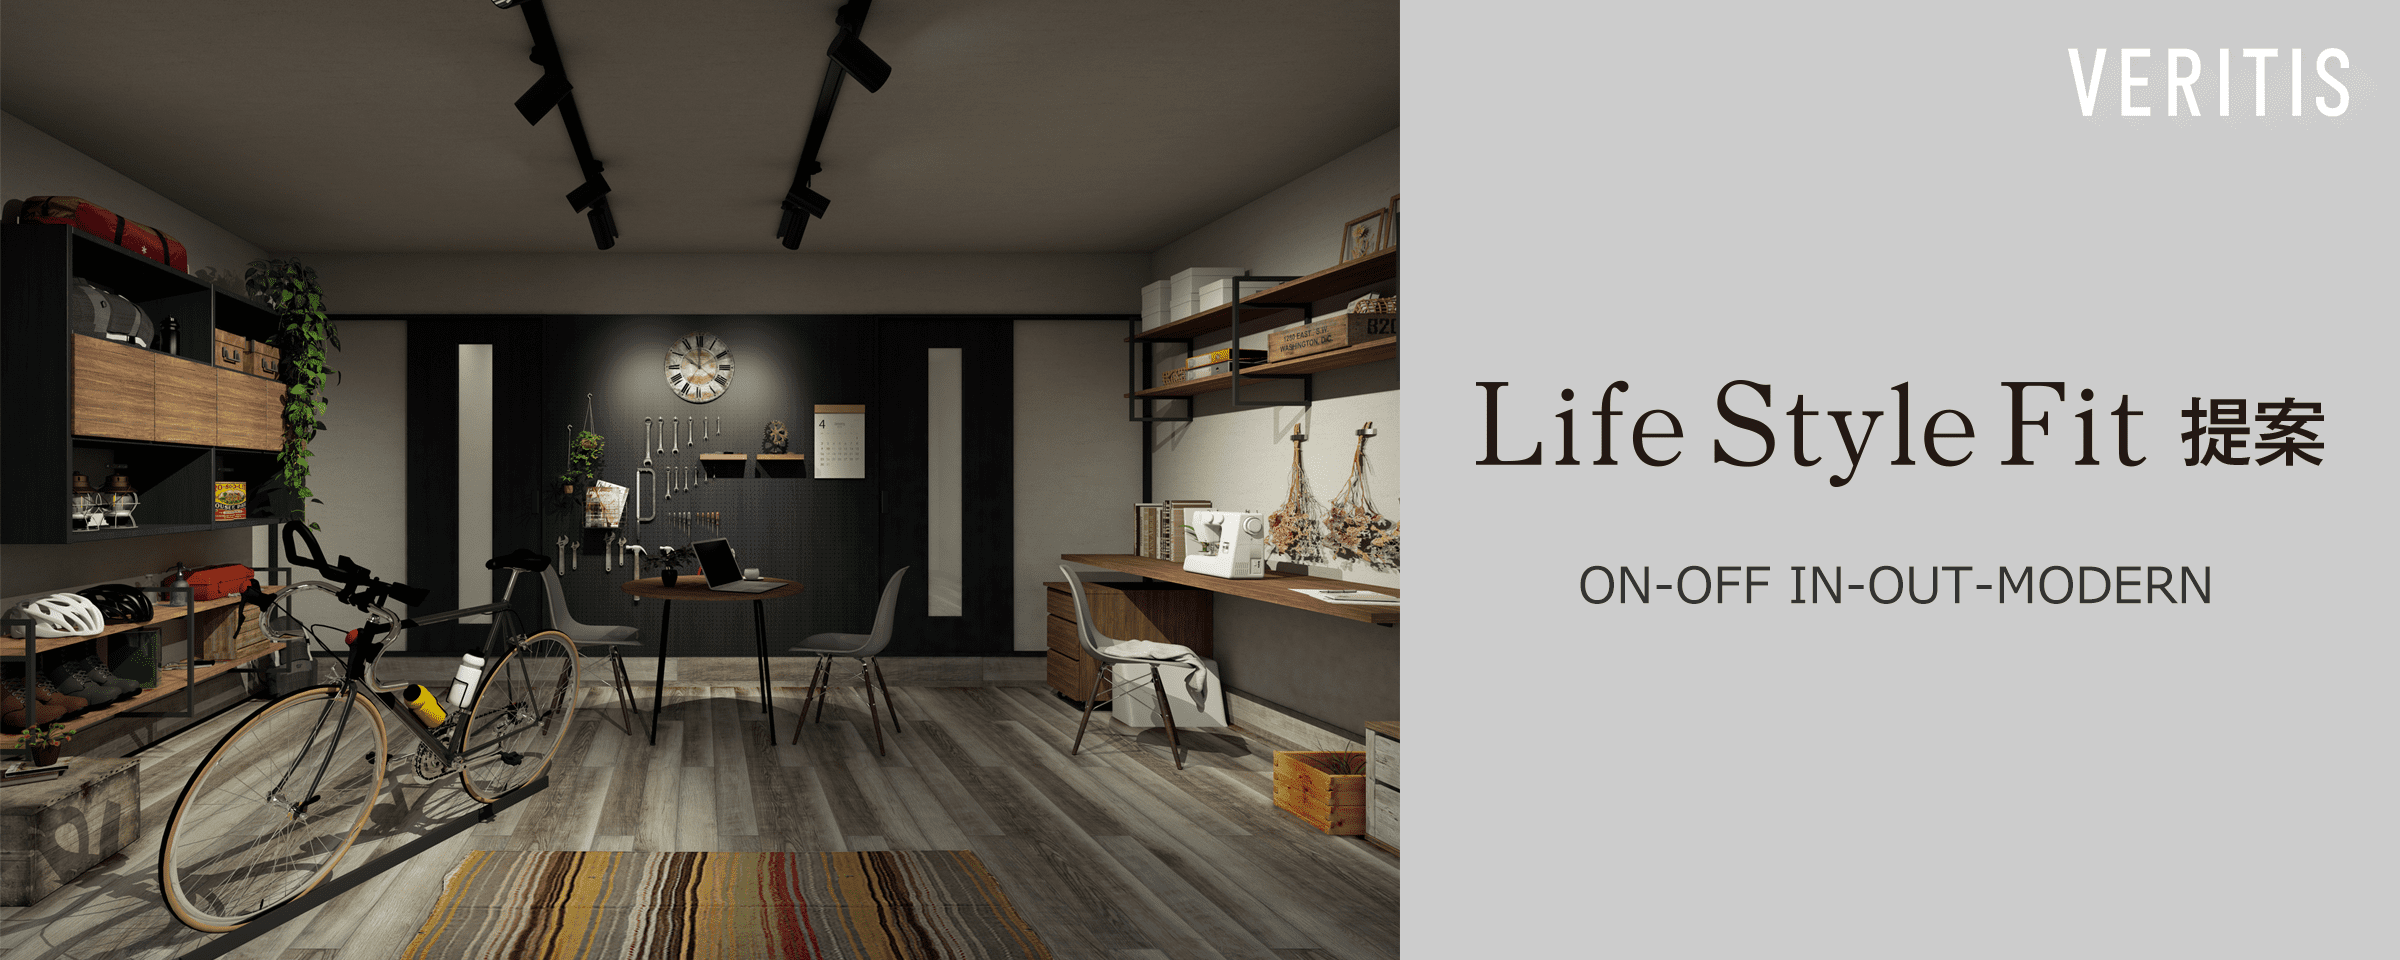 Life style Fit 提案 ON-OFF IN-OUT-MODERN